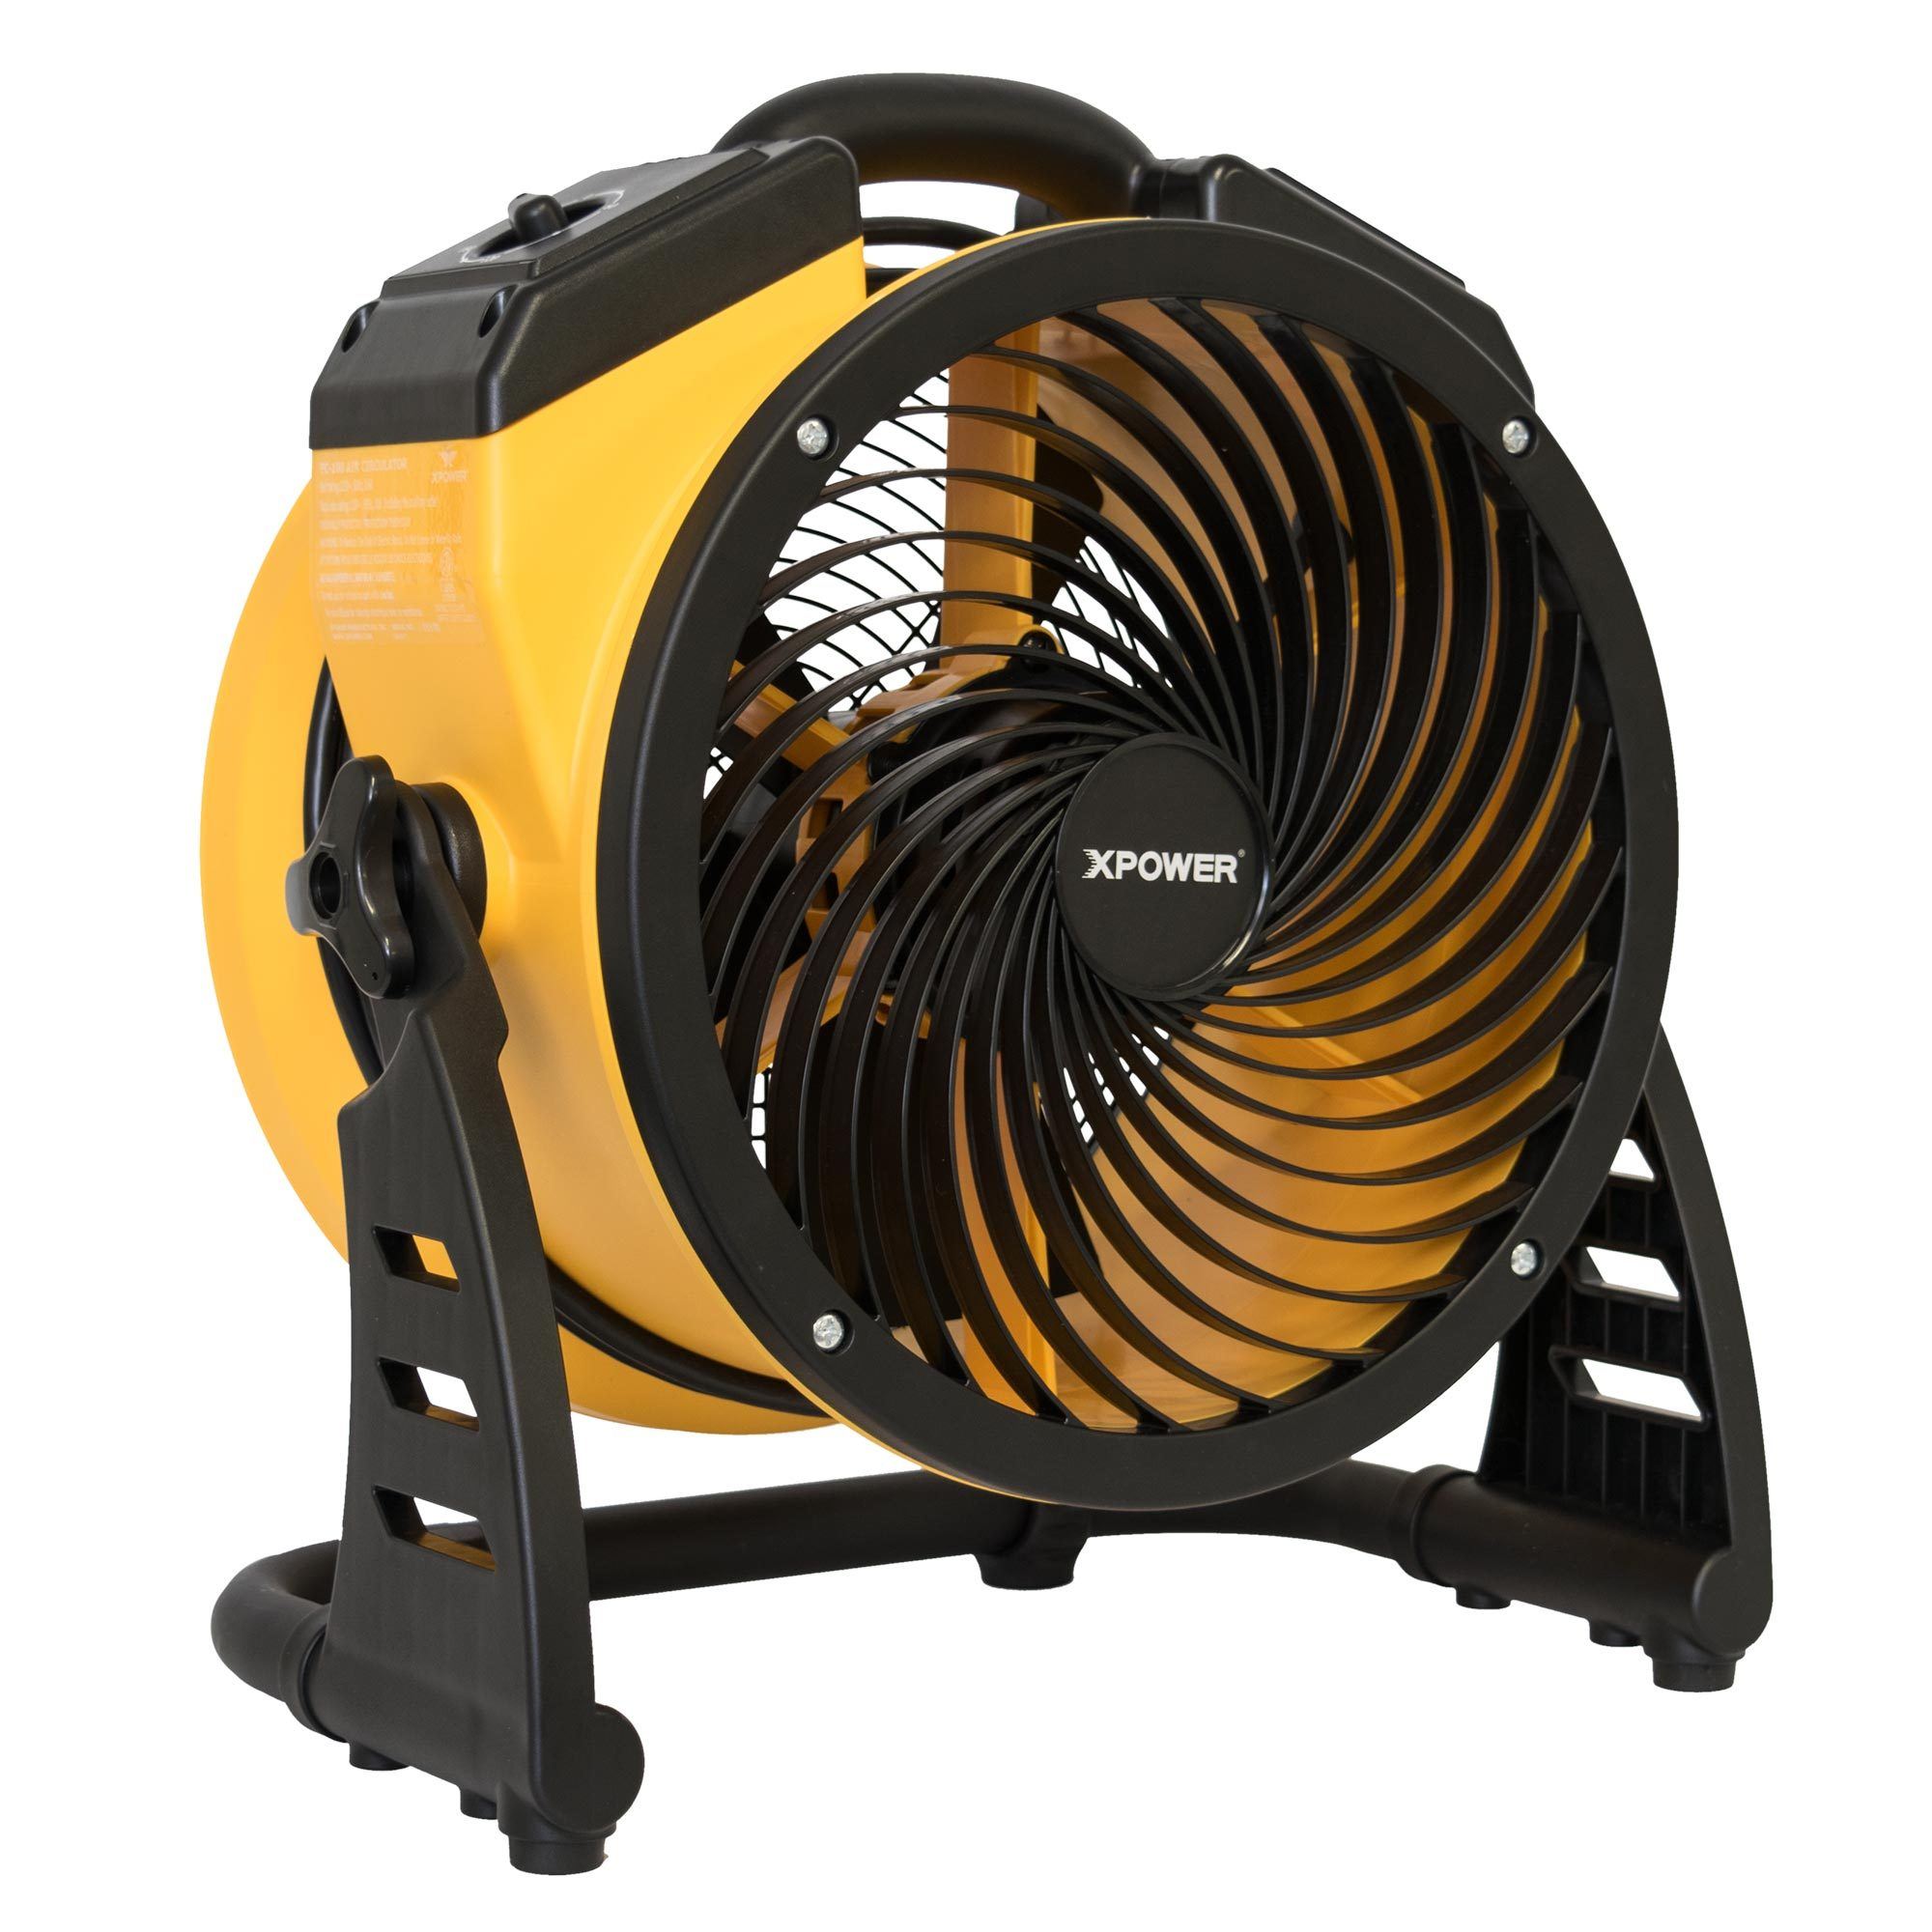 janitorial-utility-fans-and-blowers.jpg